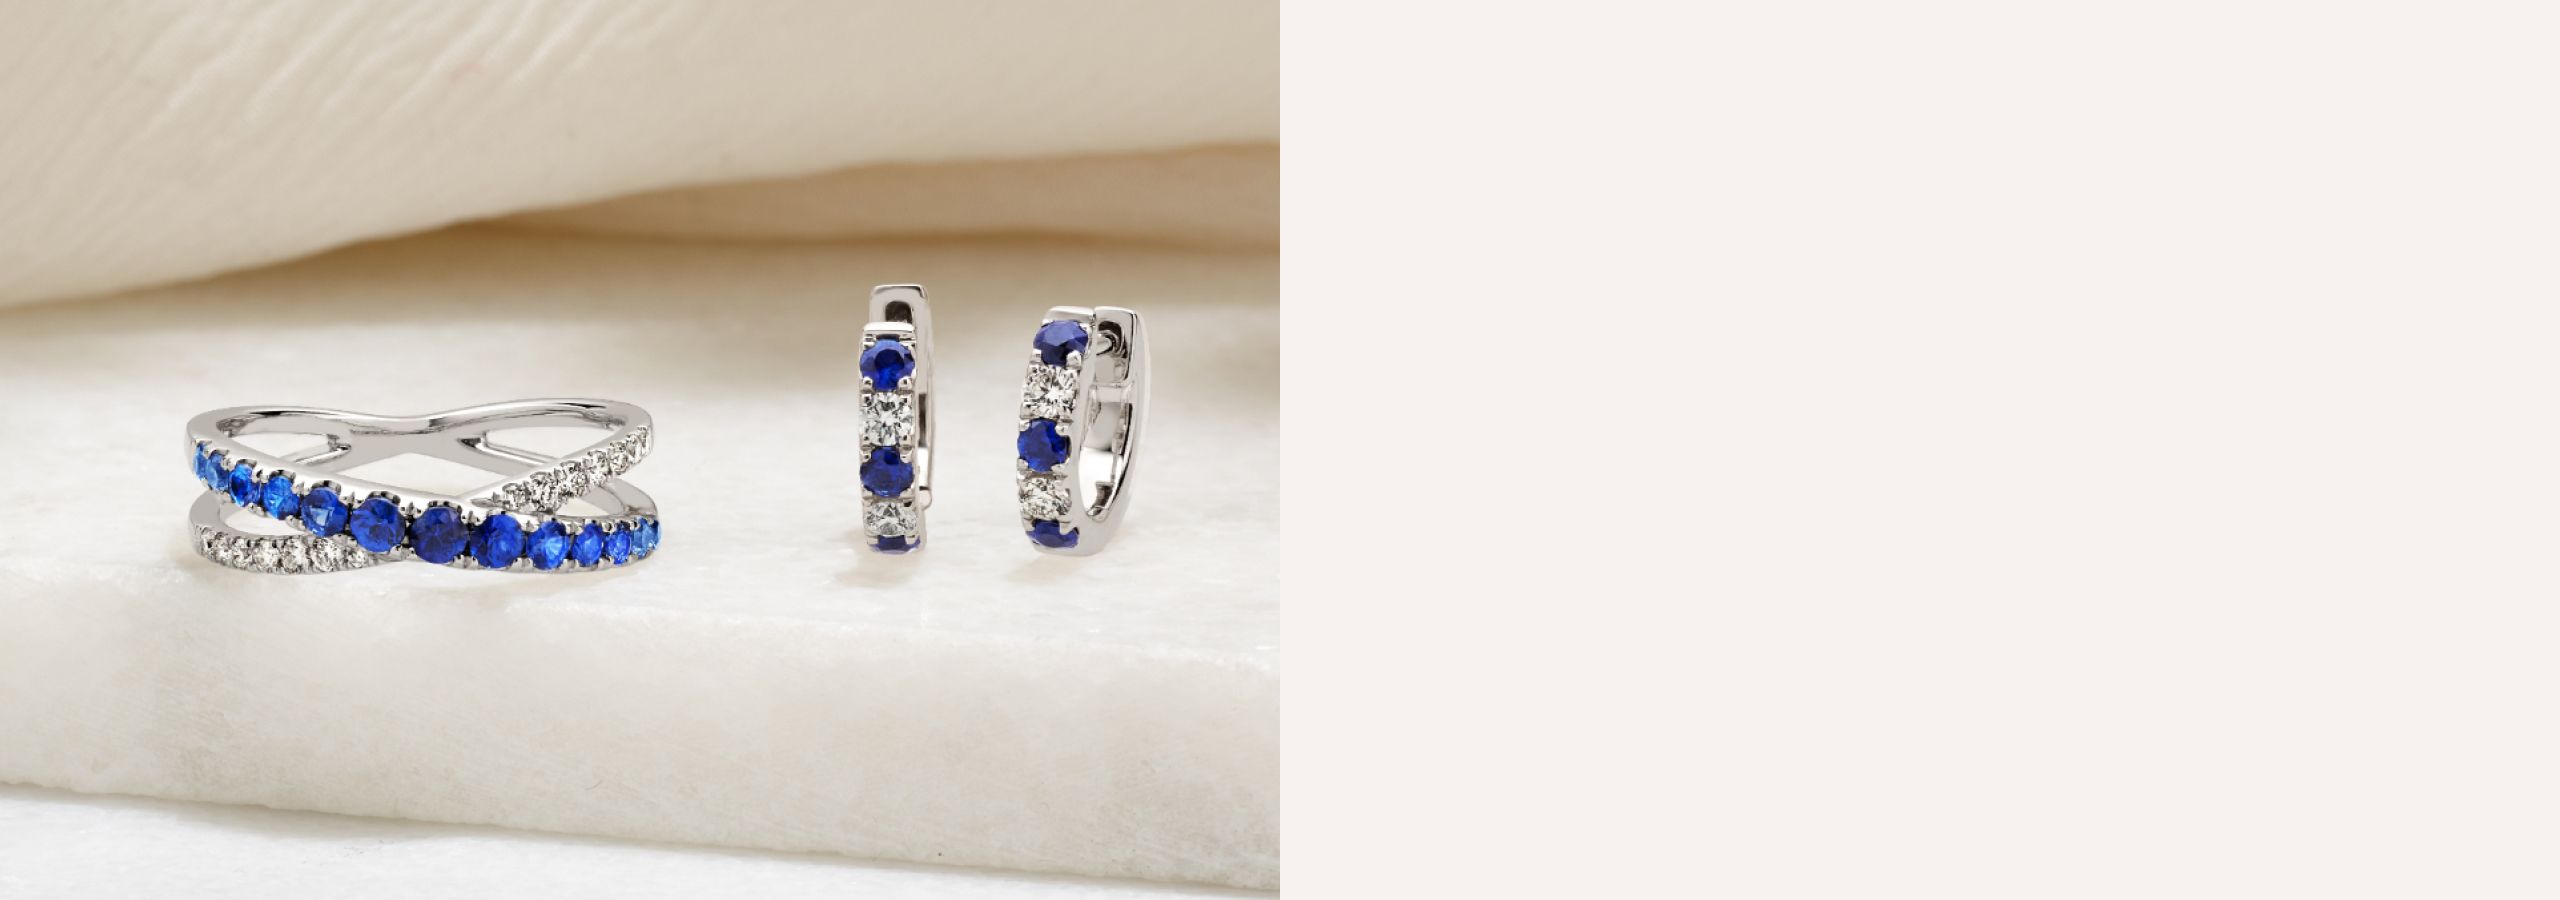 A sapphire and diamond ring with matching hoop earrings